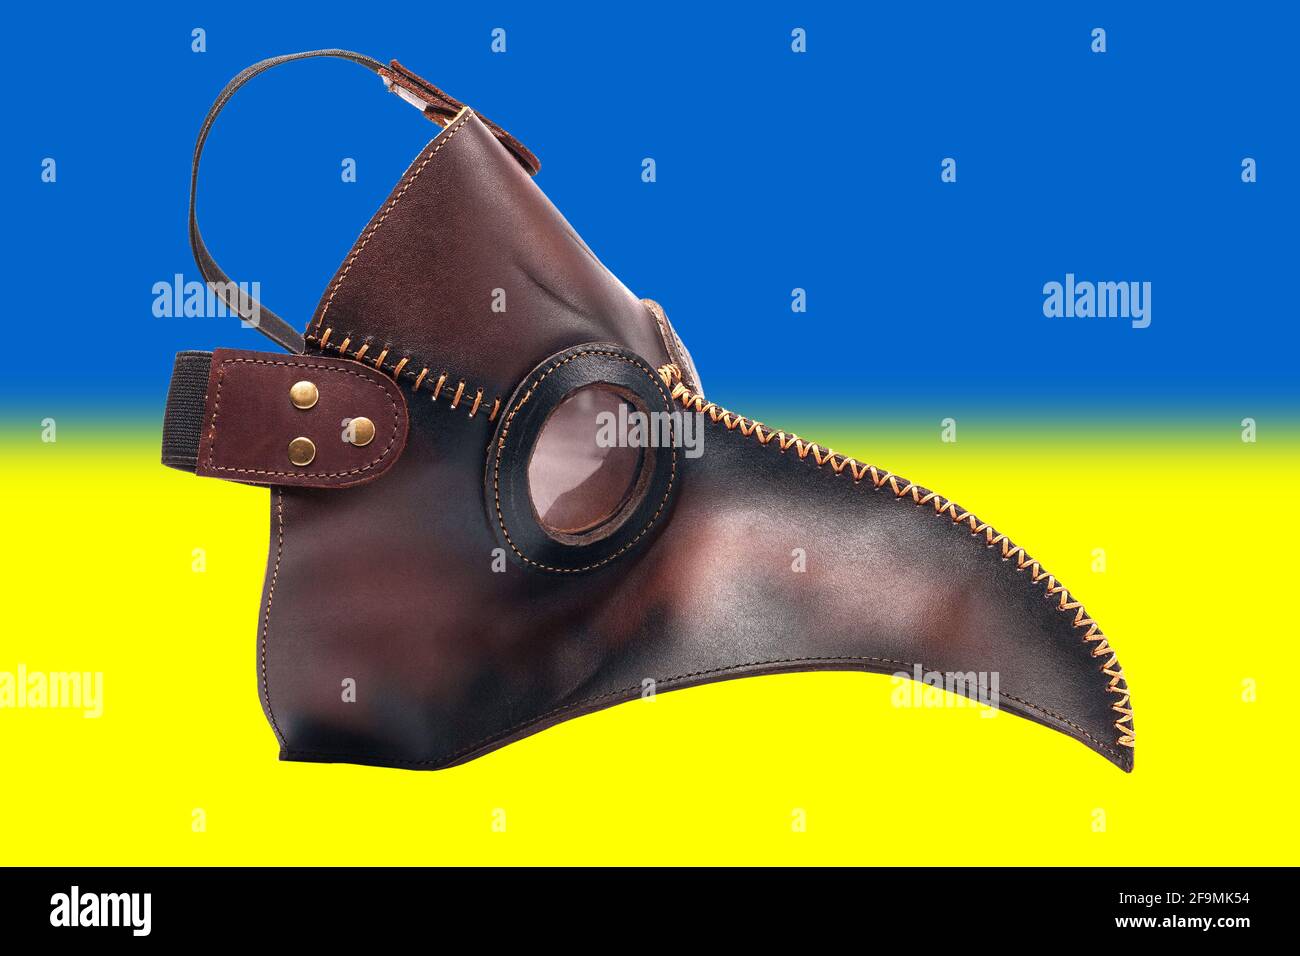 Protective medical mask of the plague doctor against the background of the flag of Ukraine. The concept of a mask mode for residents of the country and tourists during a pandemic. Stock Photo